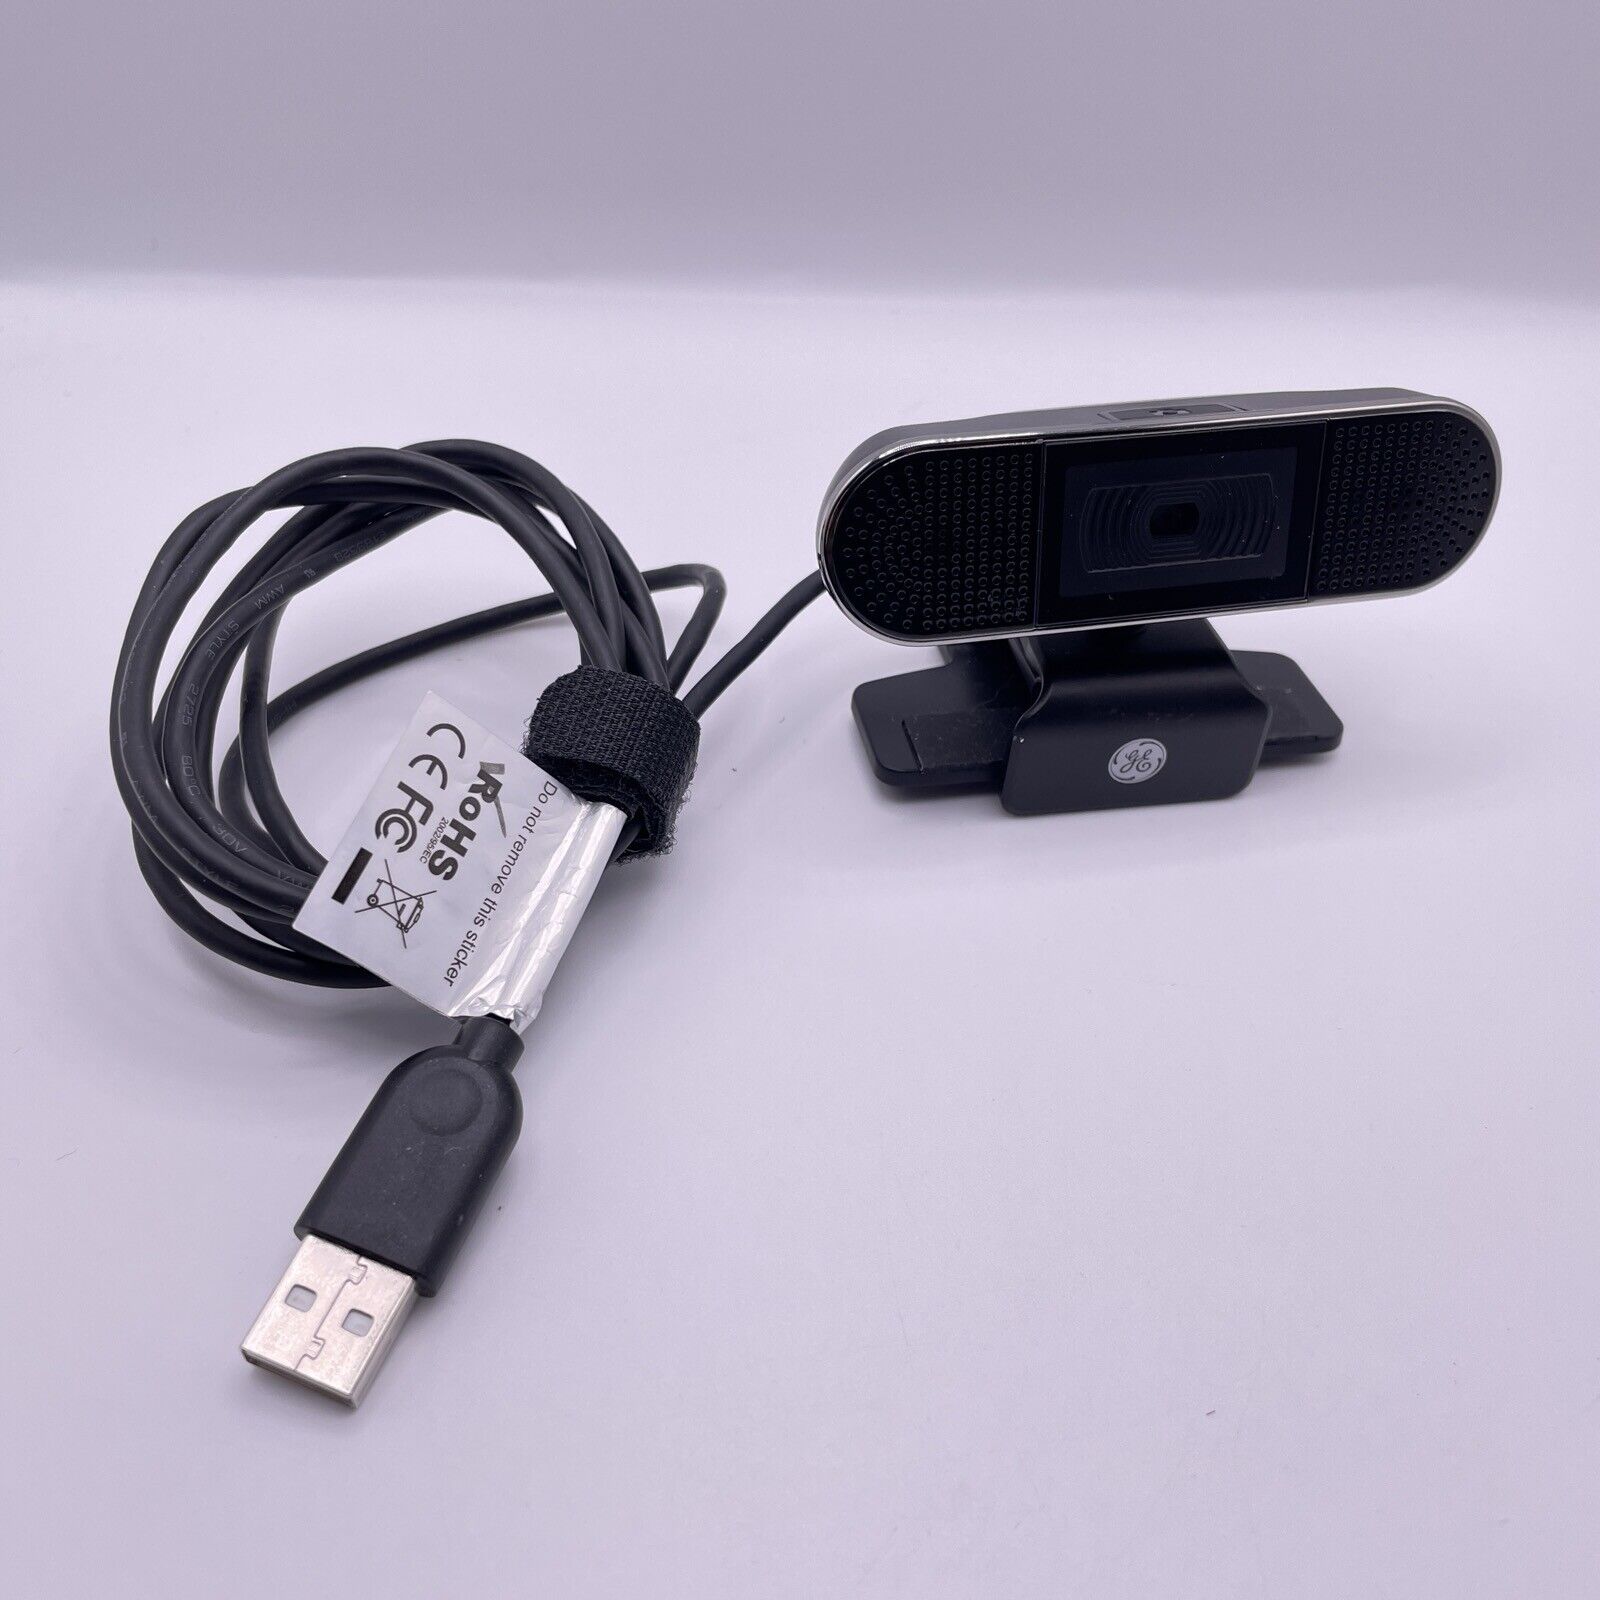 GE Business Pro HD Webcam Wired USB We Cam